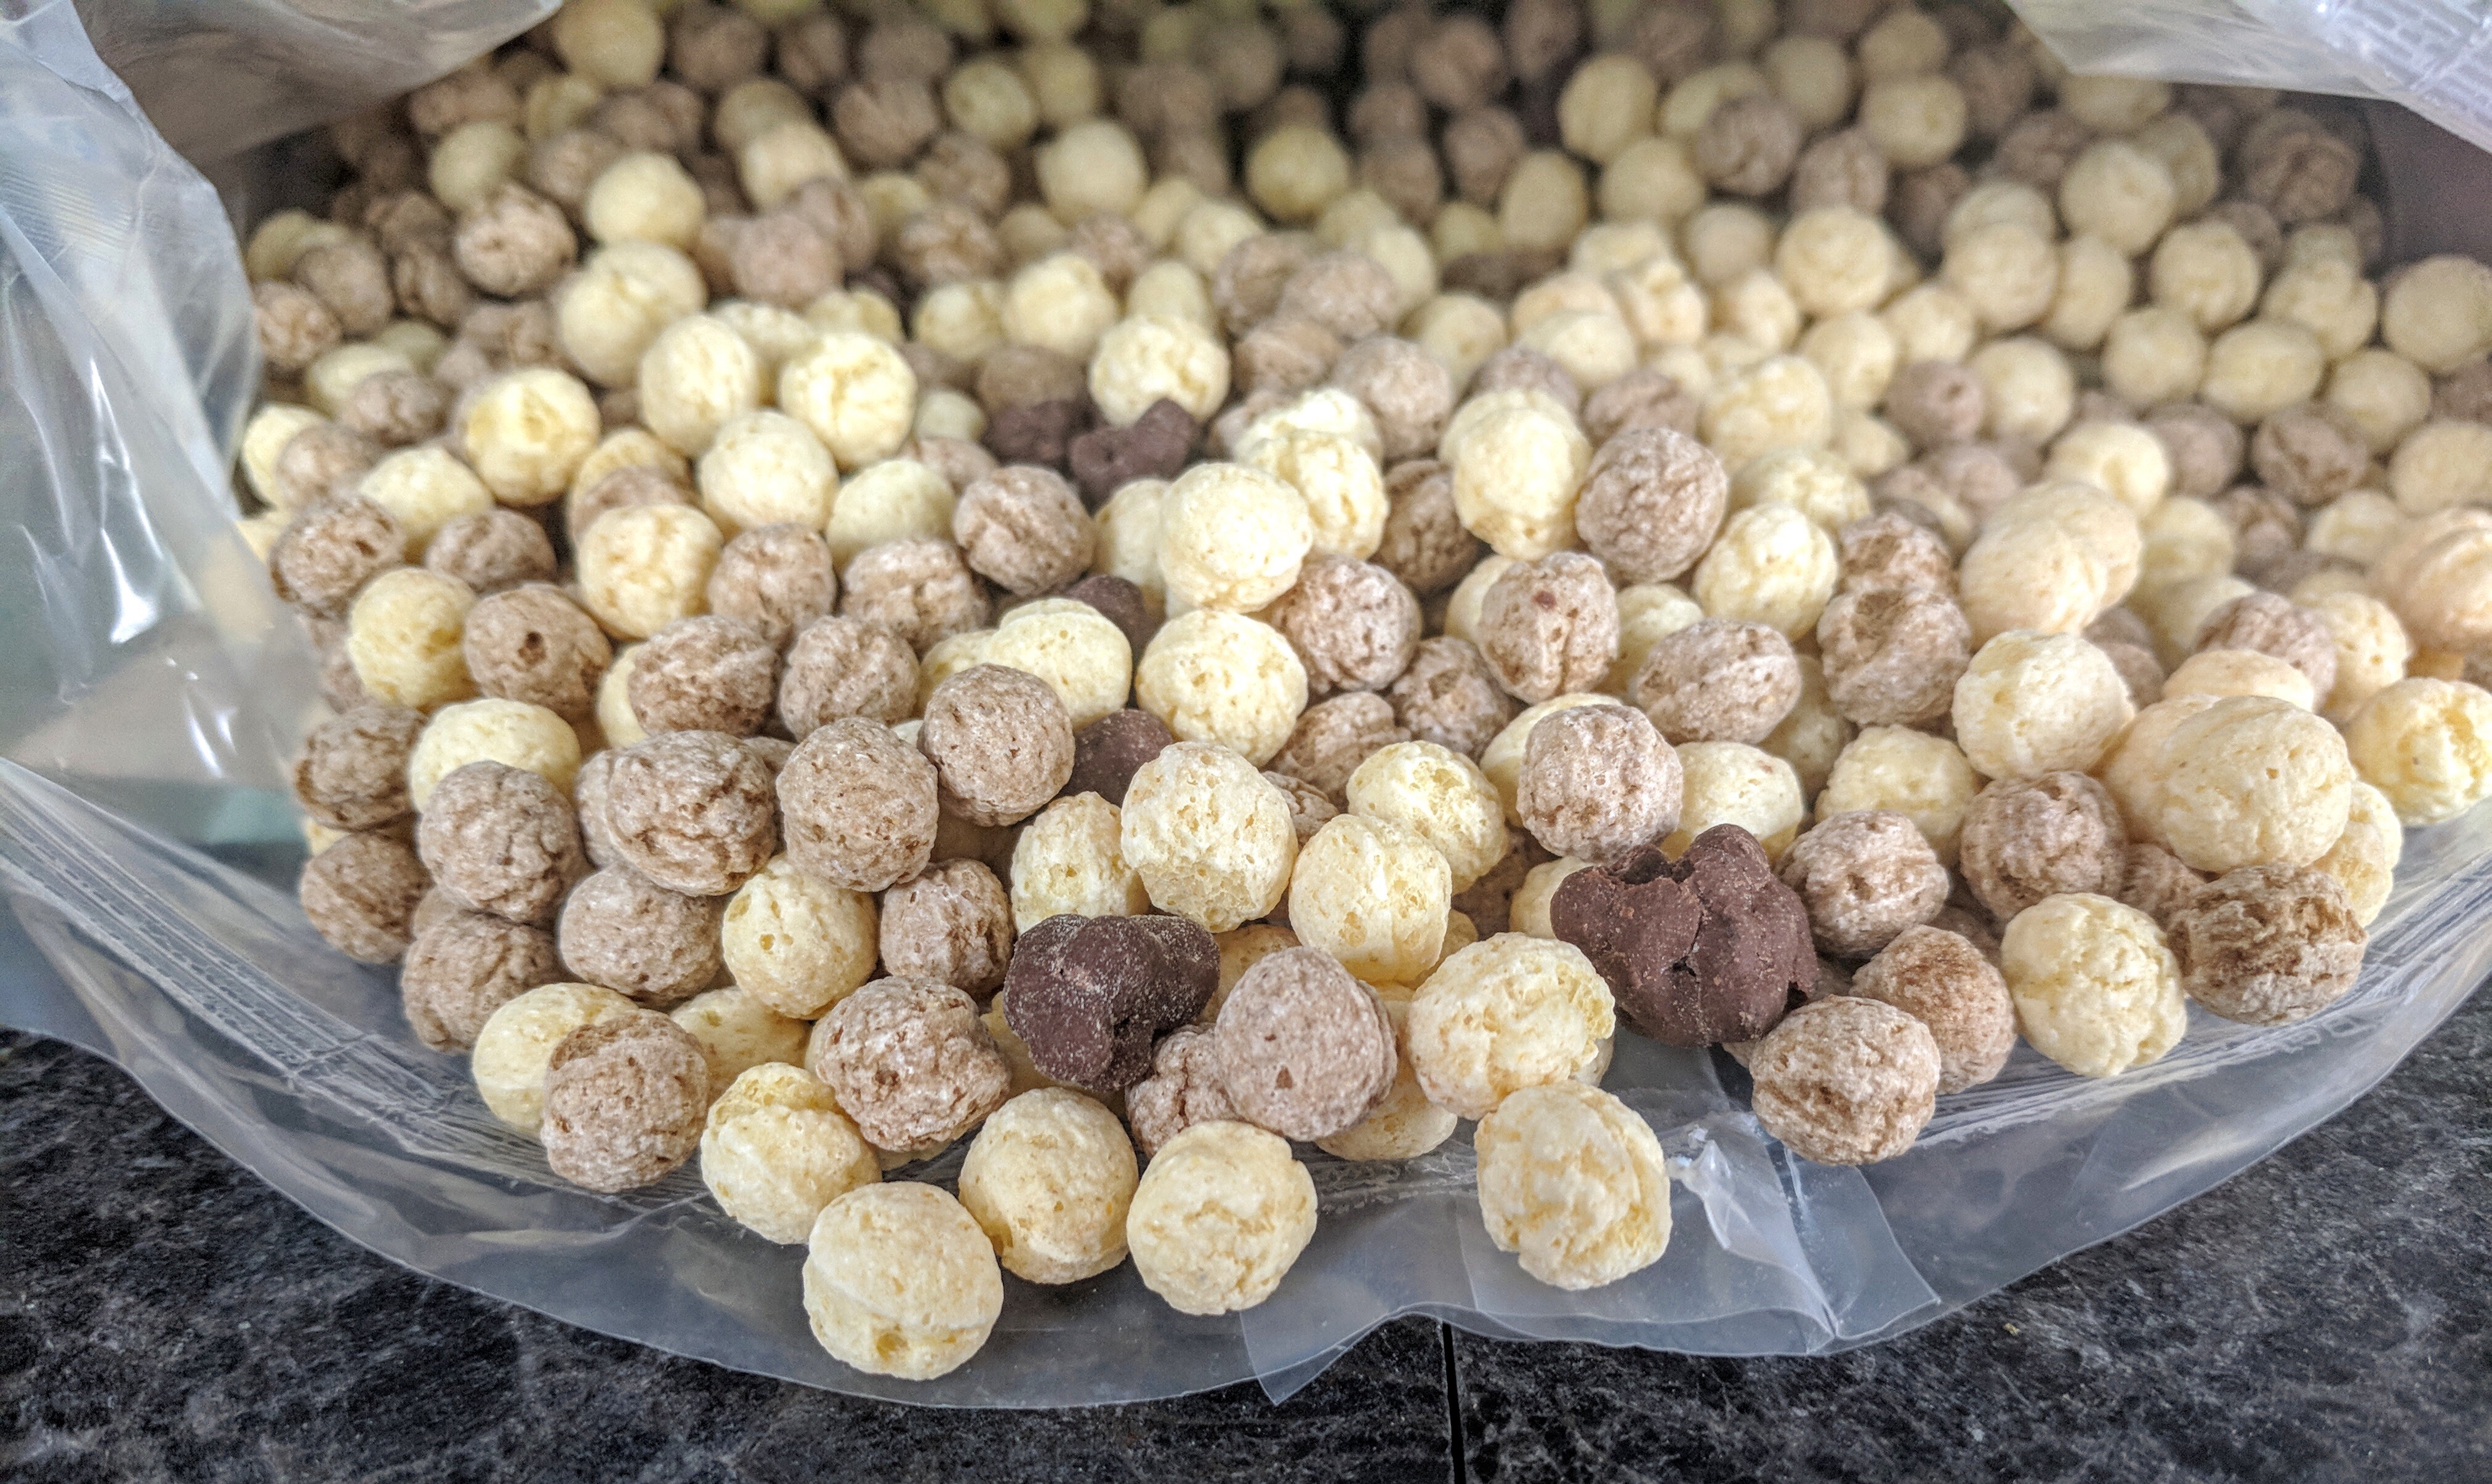 Post Cookies ‘n’ Creme Dippin’ Dots Cereal Review